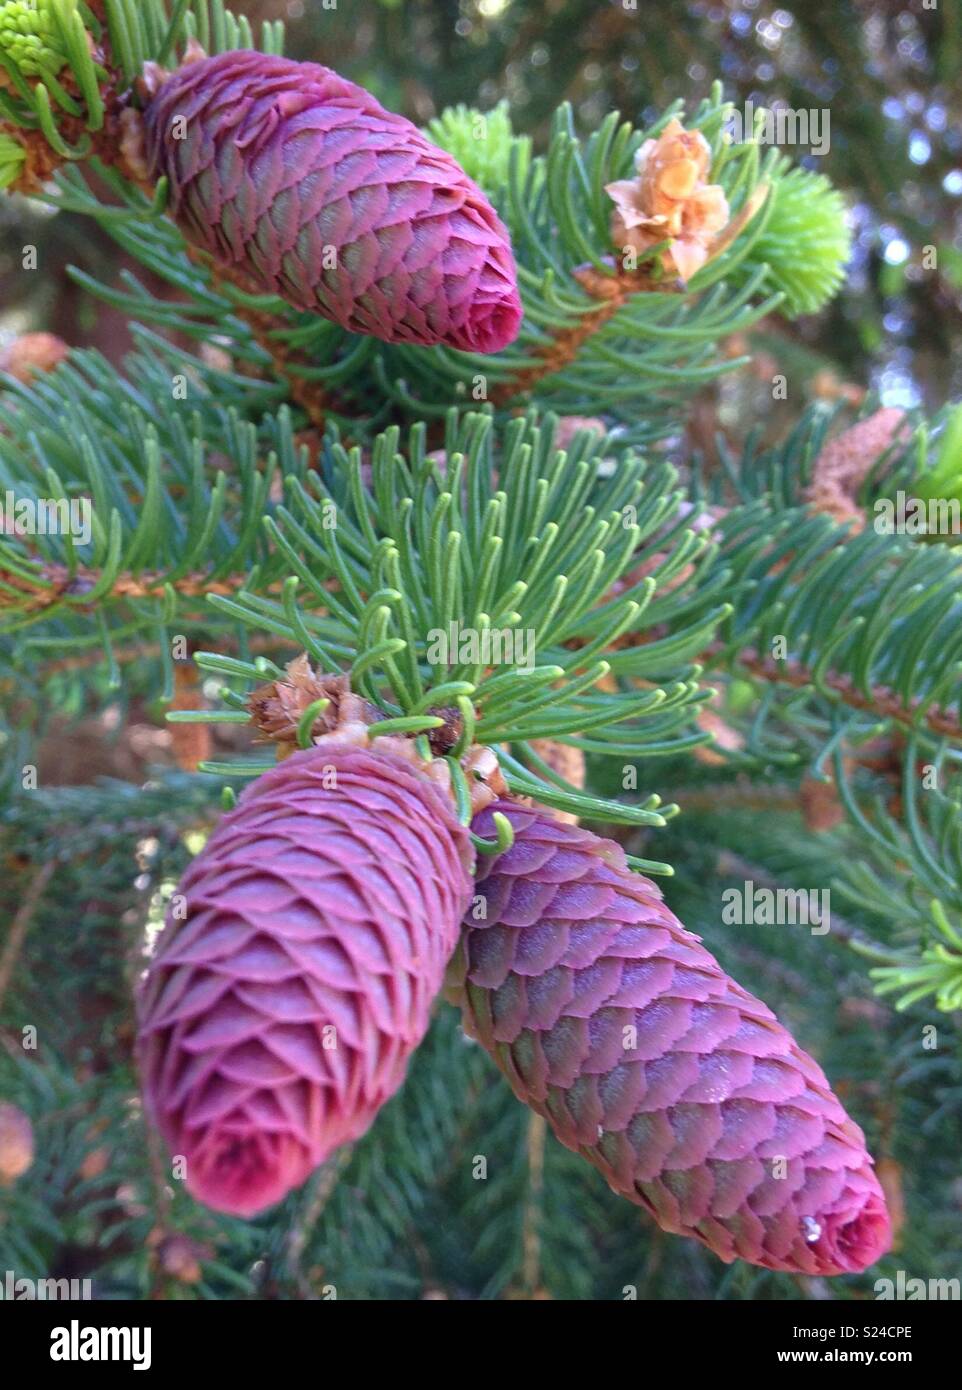 New growth on an Evergreen pine tree. Interesting color of pine cones. Stock Photo